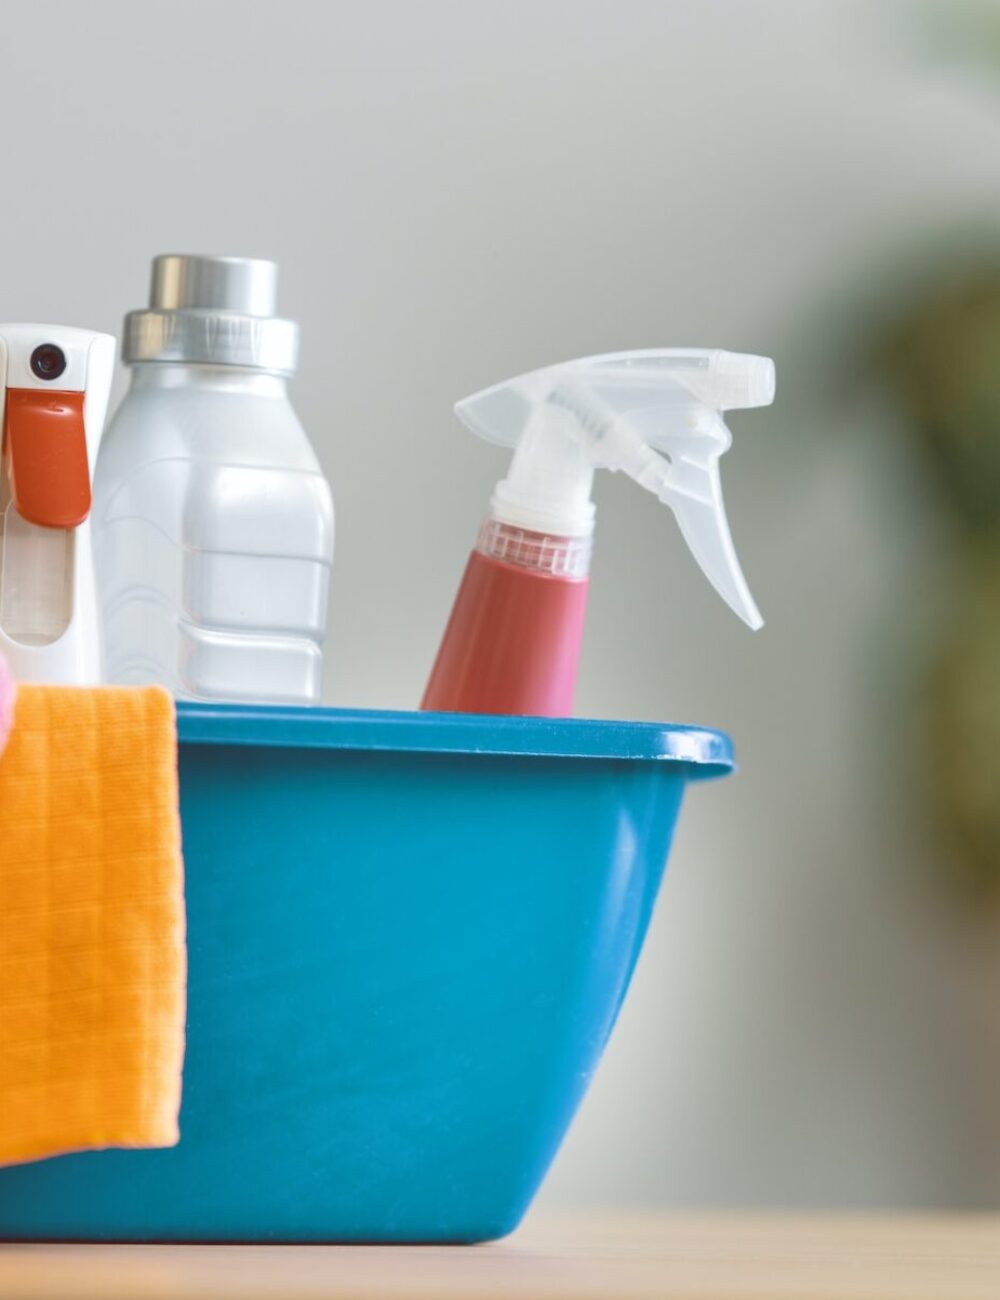 basket-with-cleaning-items.jpg